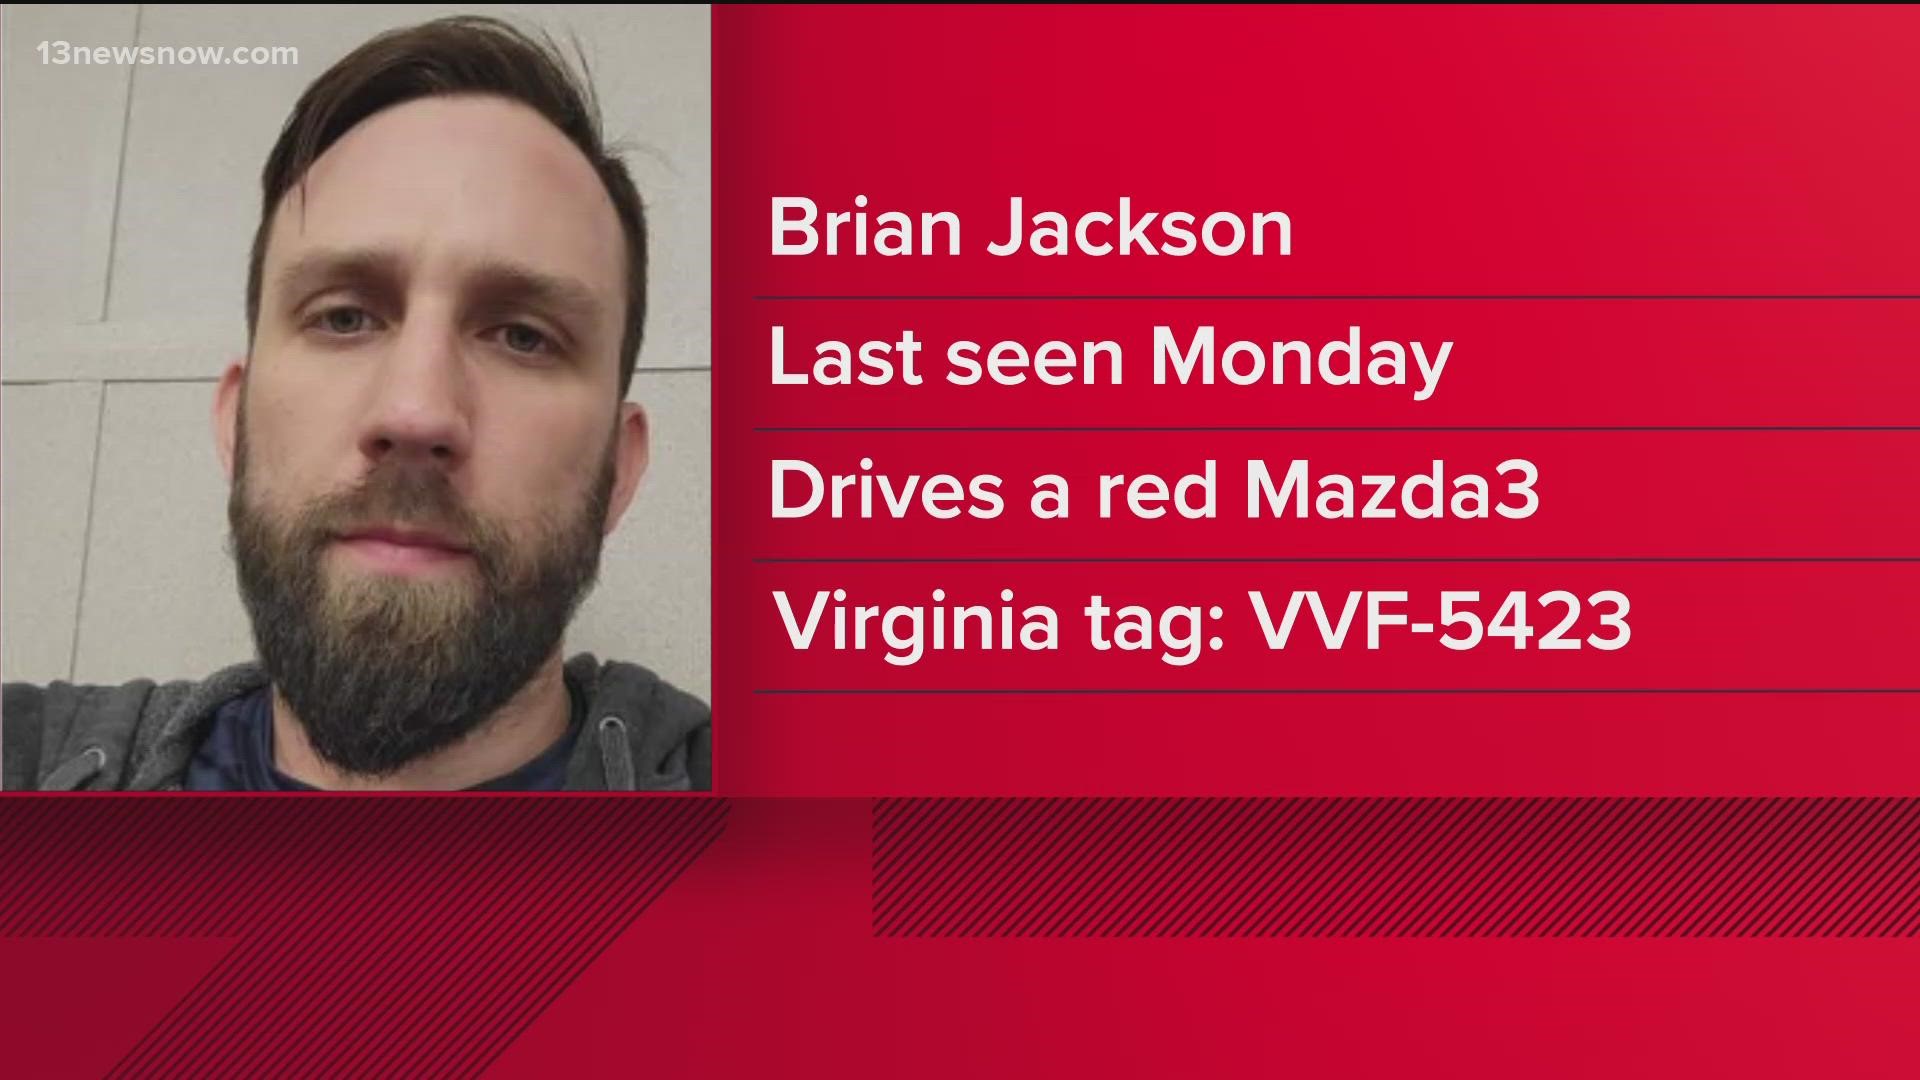 On Thursday, the Isle of Wight Sheriff's Office alerted Virginia Beach police that 33-year-old Brian Jackson of Virginia Beach hadn't been seen for days.